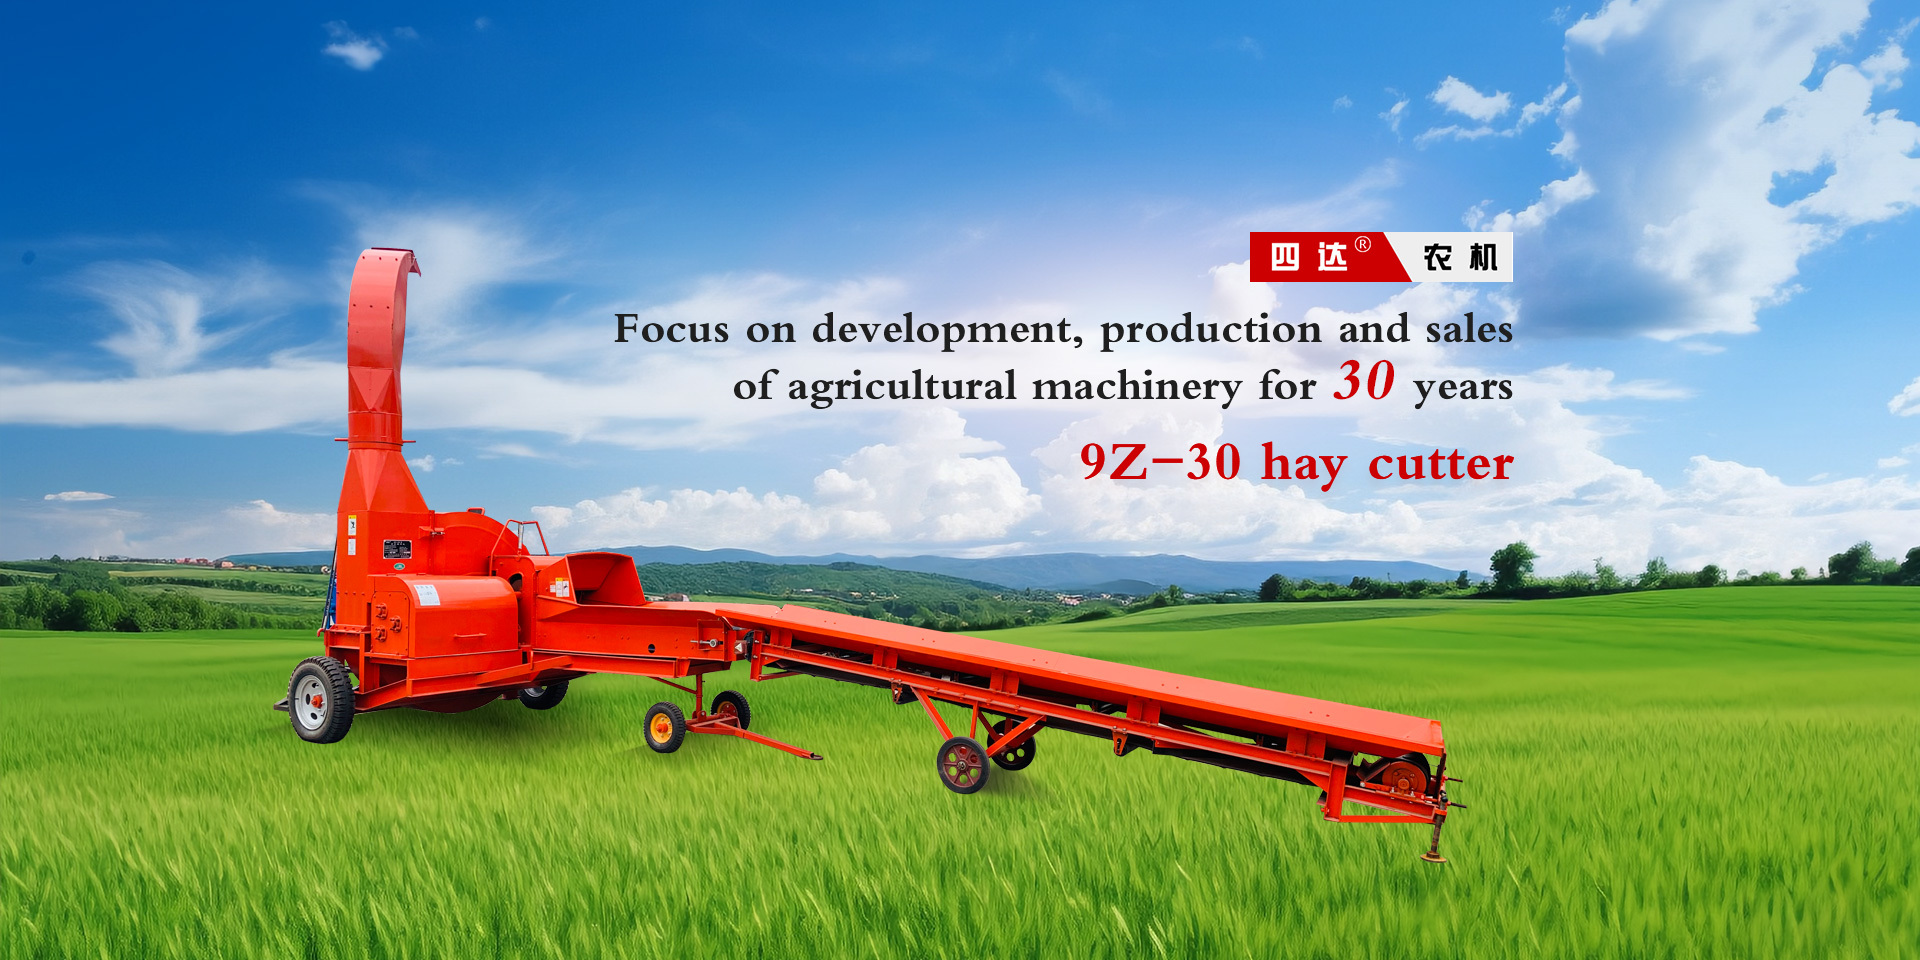 Sida Agricultural Machinery